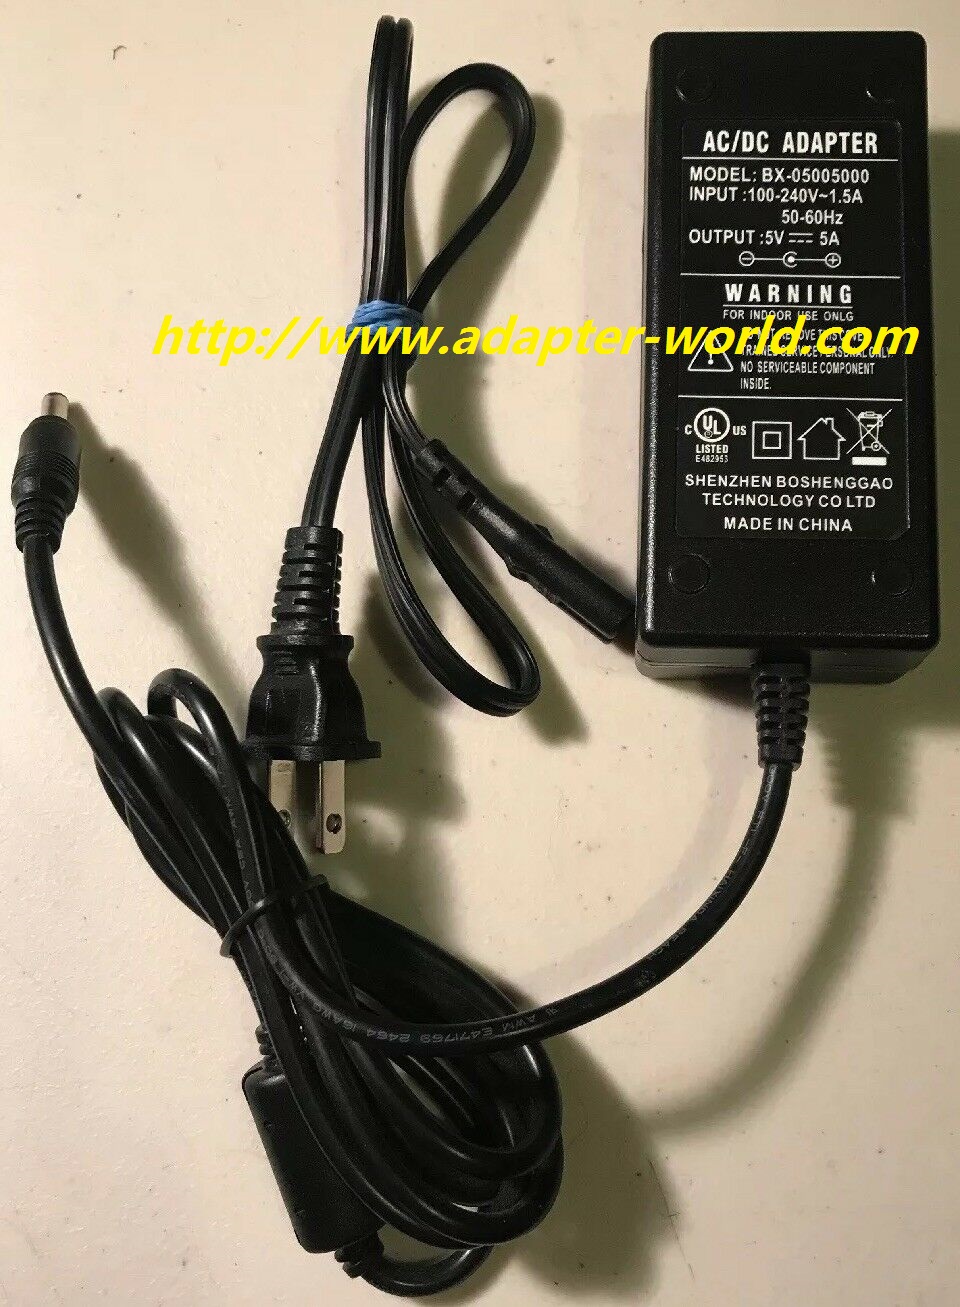 *100% Brand NEW* BX-05005000 5V 5A Works Tested AC/DC Adapter Free shipping!